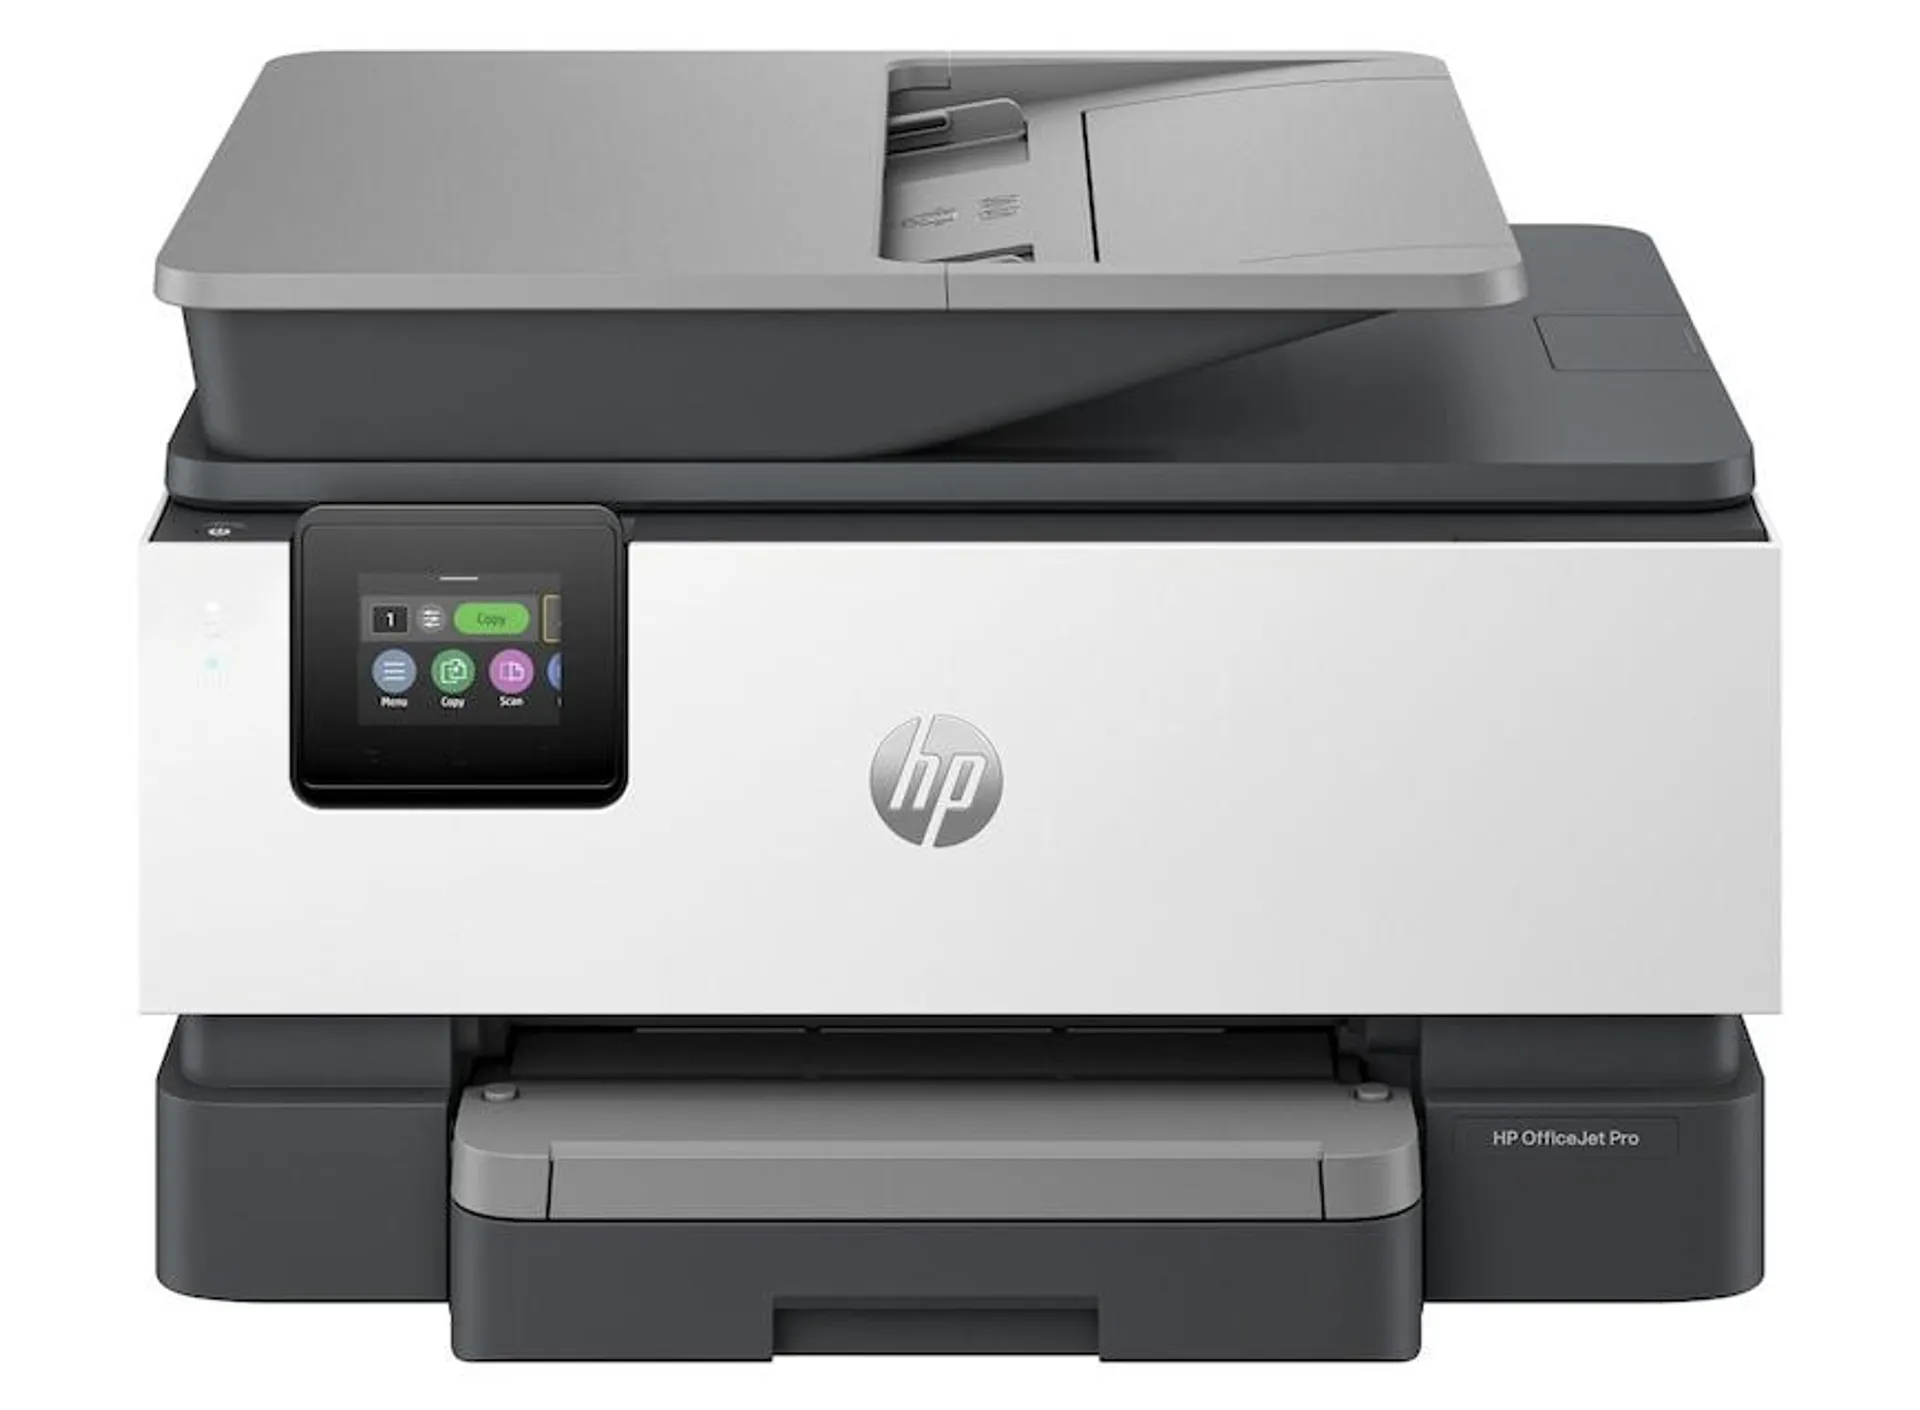 HP OfficeJet Pro 9120e Wireless All-in-One Printer with Fax and 3 months Instant Ink